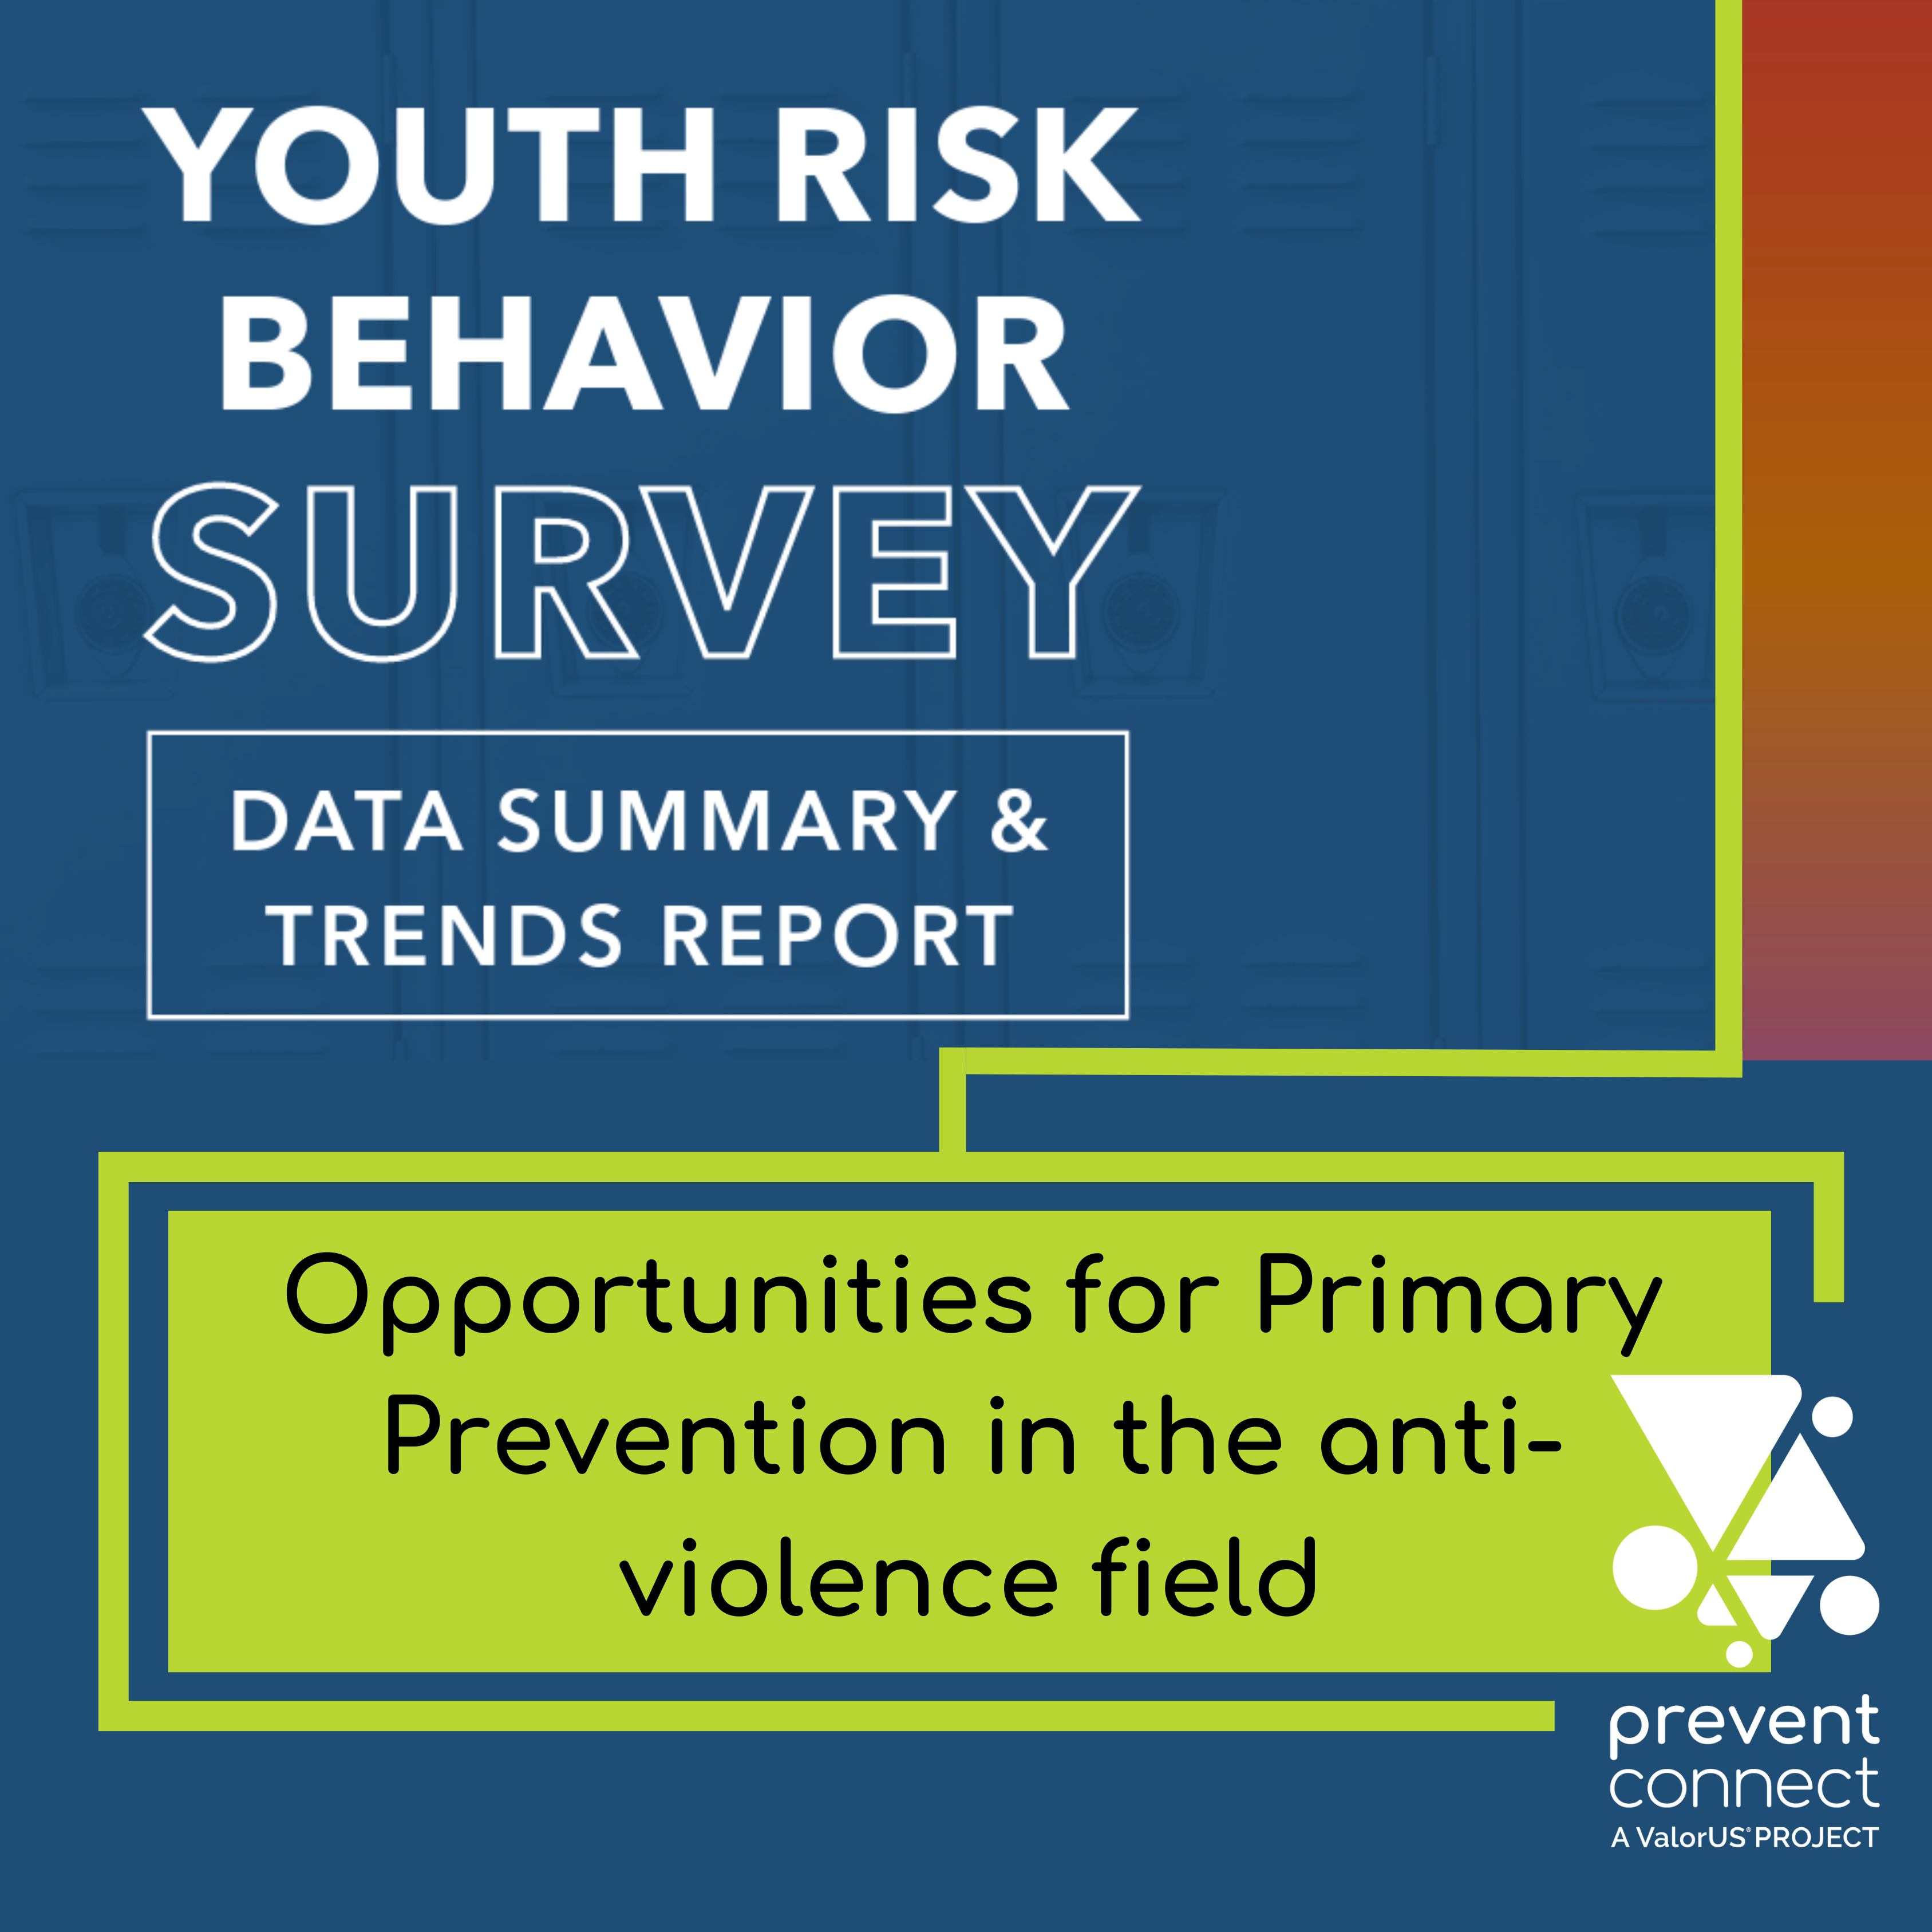 Youth risk behavior survey. Data, summary and trends report. Opportunities for primary prevention in the anti-sexual violence field. Prevent Connect logo.